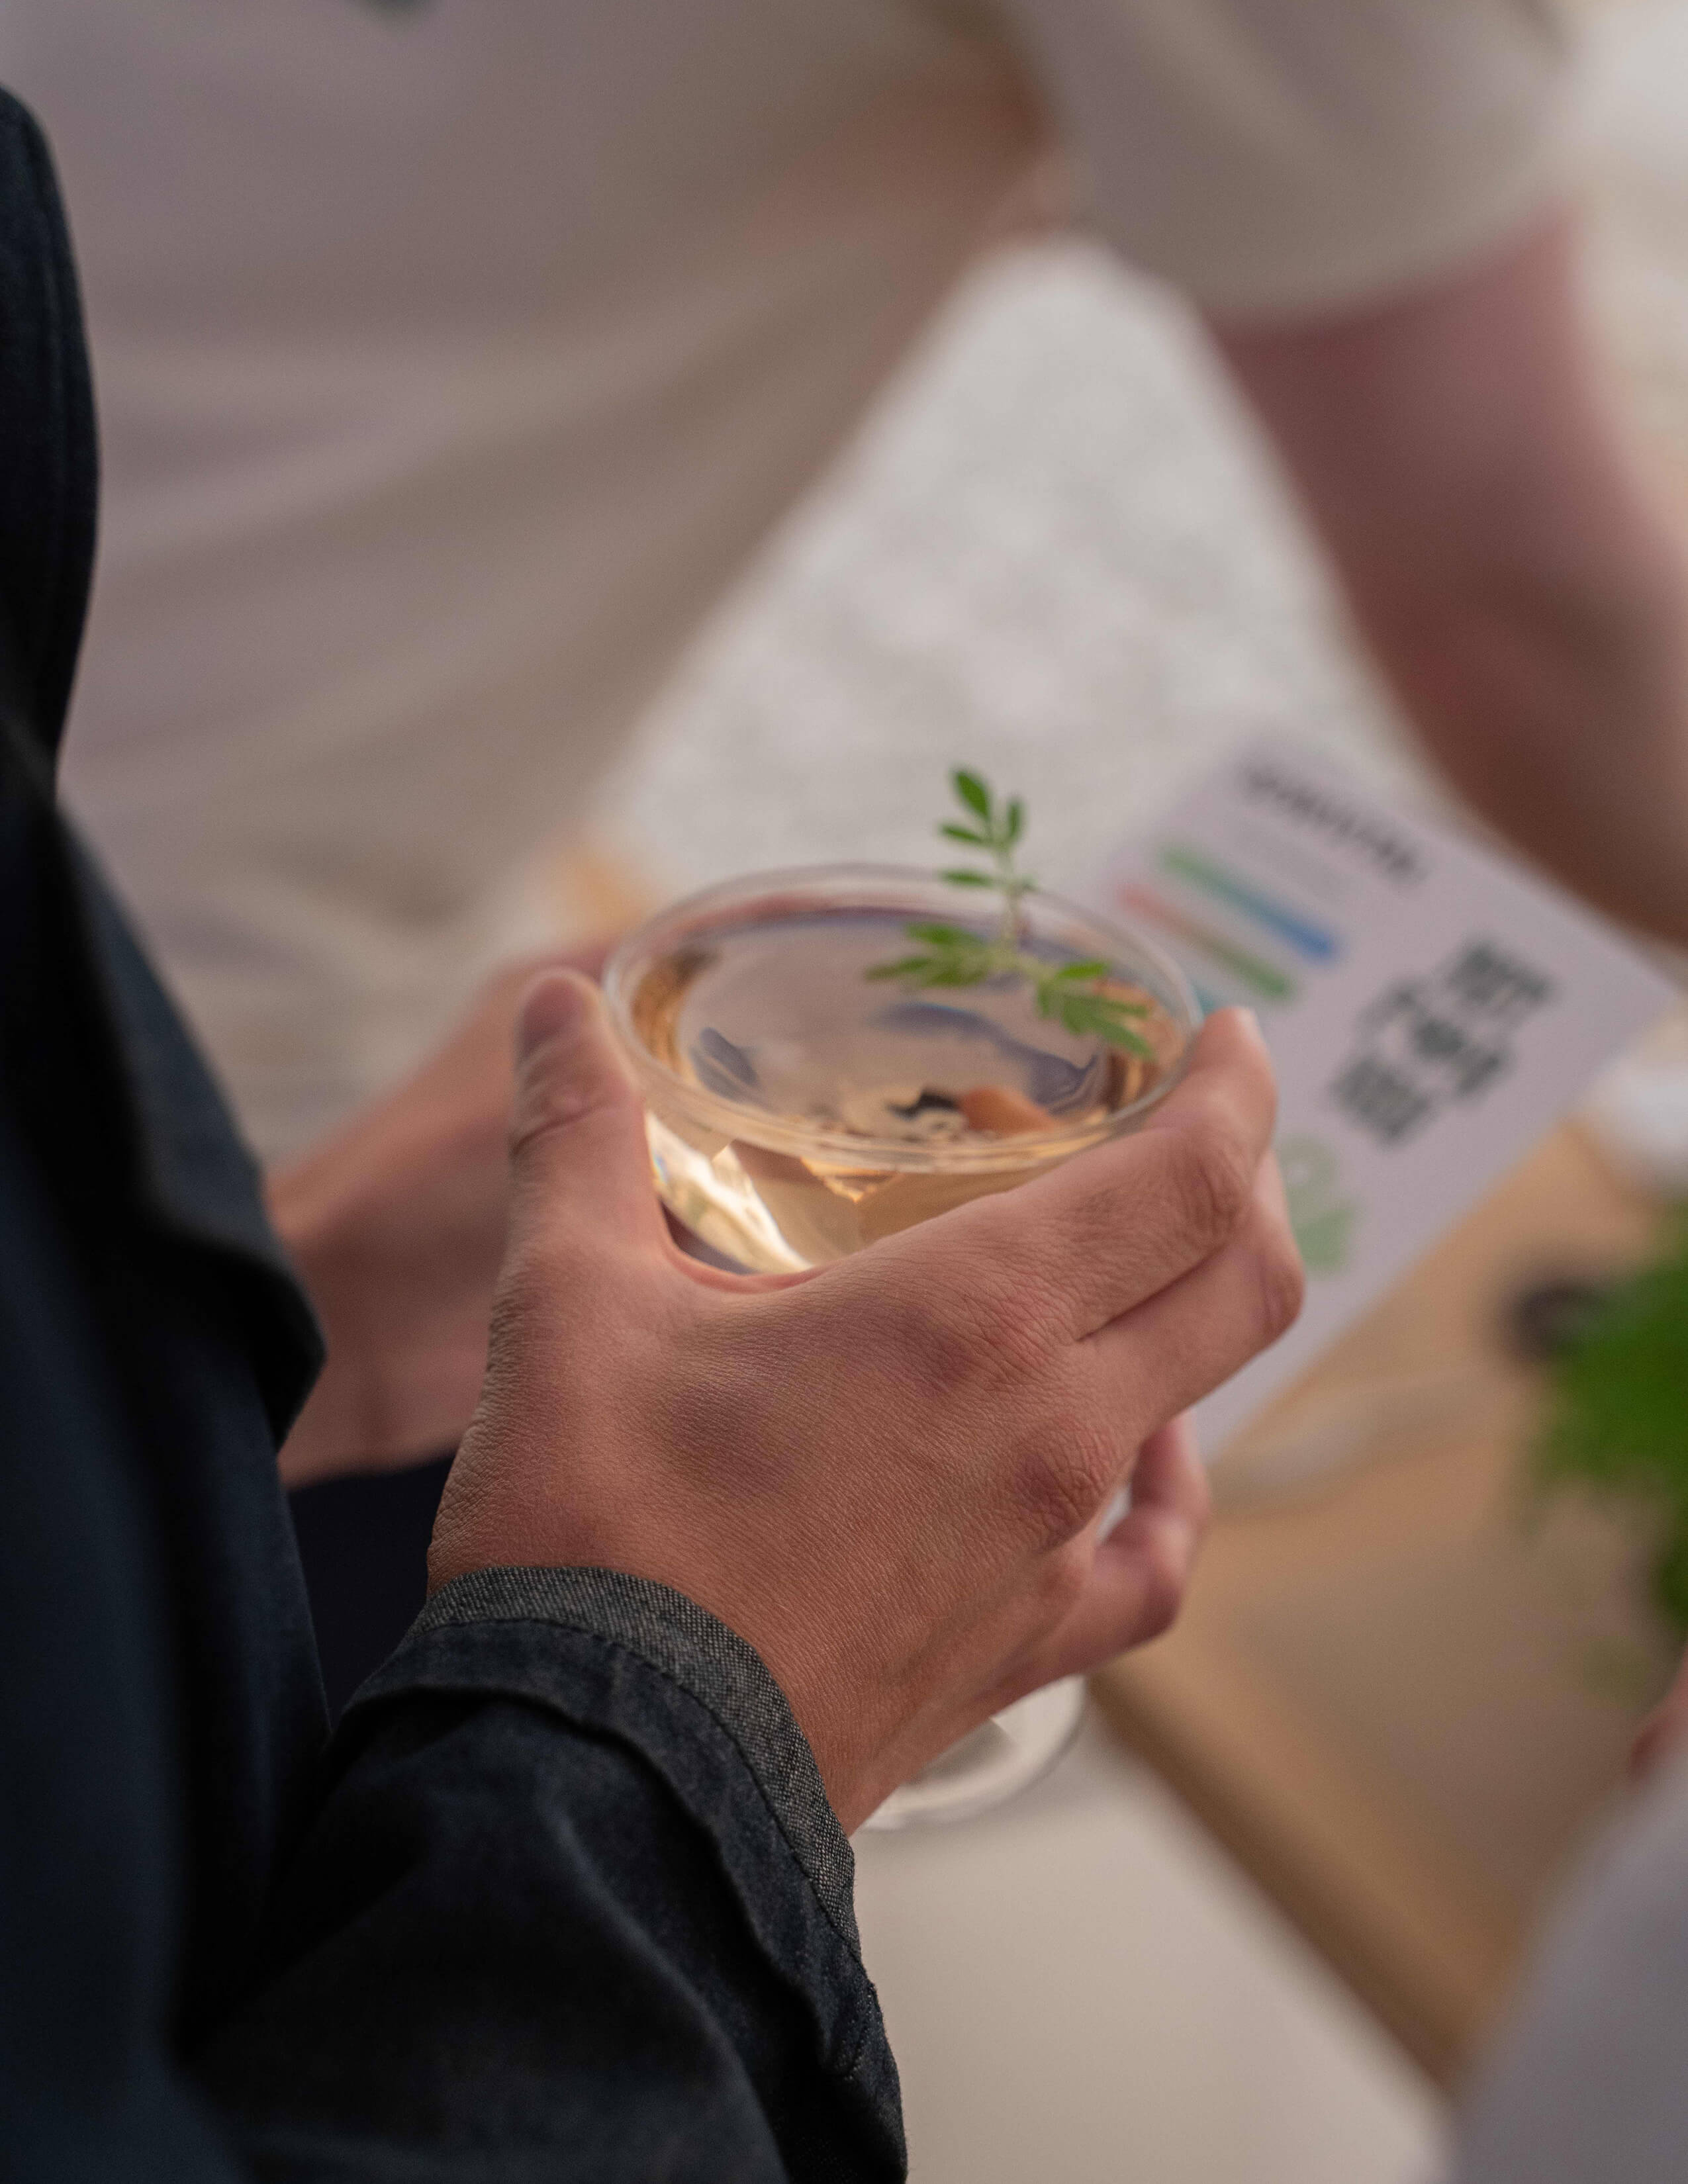 A person holds a glass of water with a small plant in it.